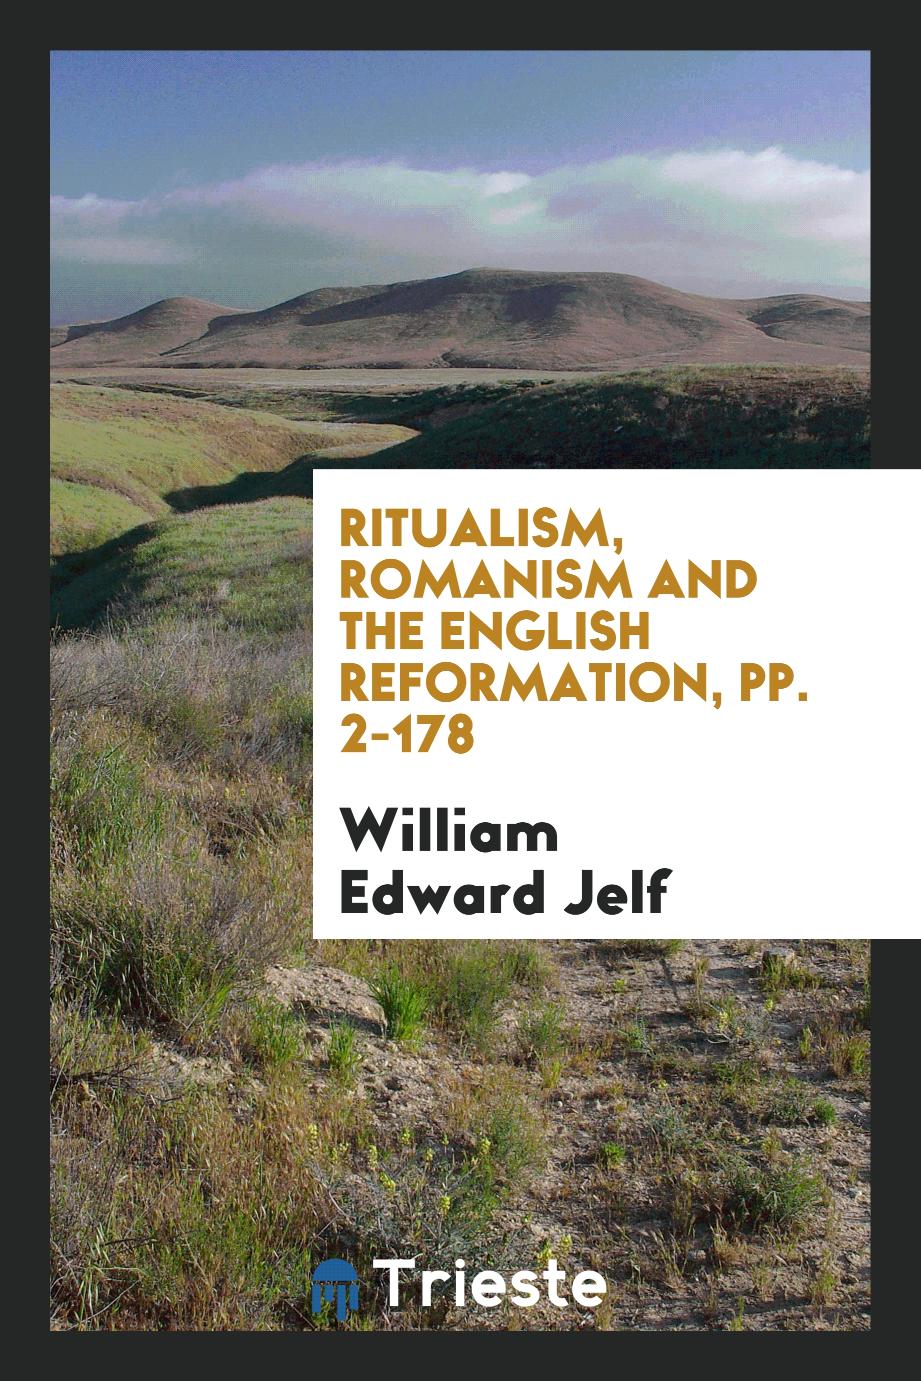 Ritualism, Romanism and the English Reformation, pp. 2-178